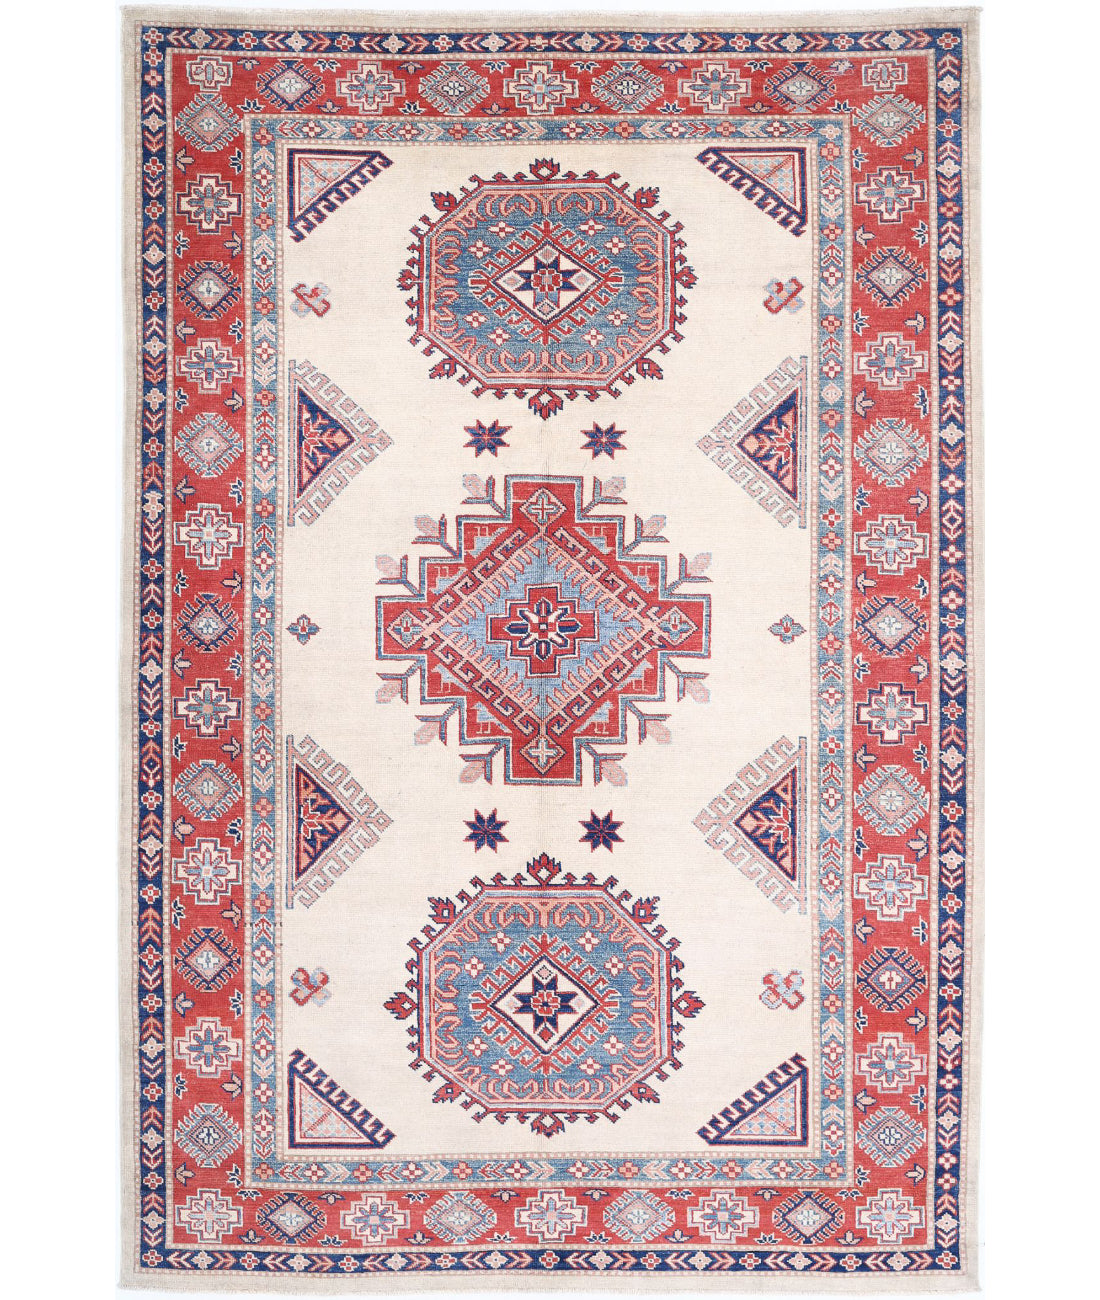 Hand Knotted Tribal Kazak Wool Rug - 6'3'' x 9'4'' 6'3'' x 9'4'' (188 X 280) / Ivory / Red